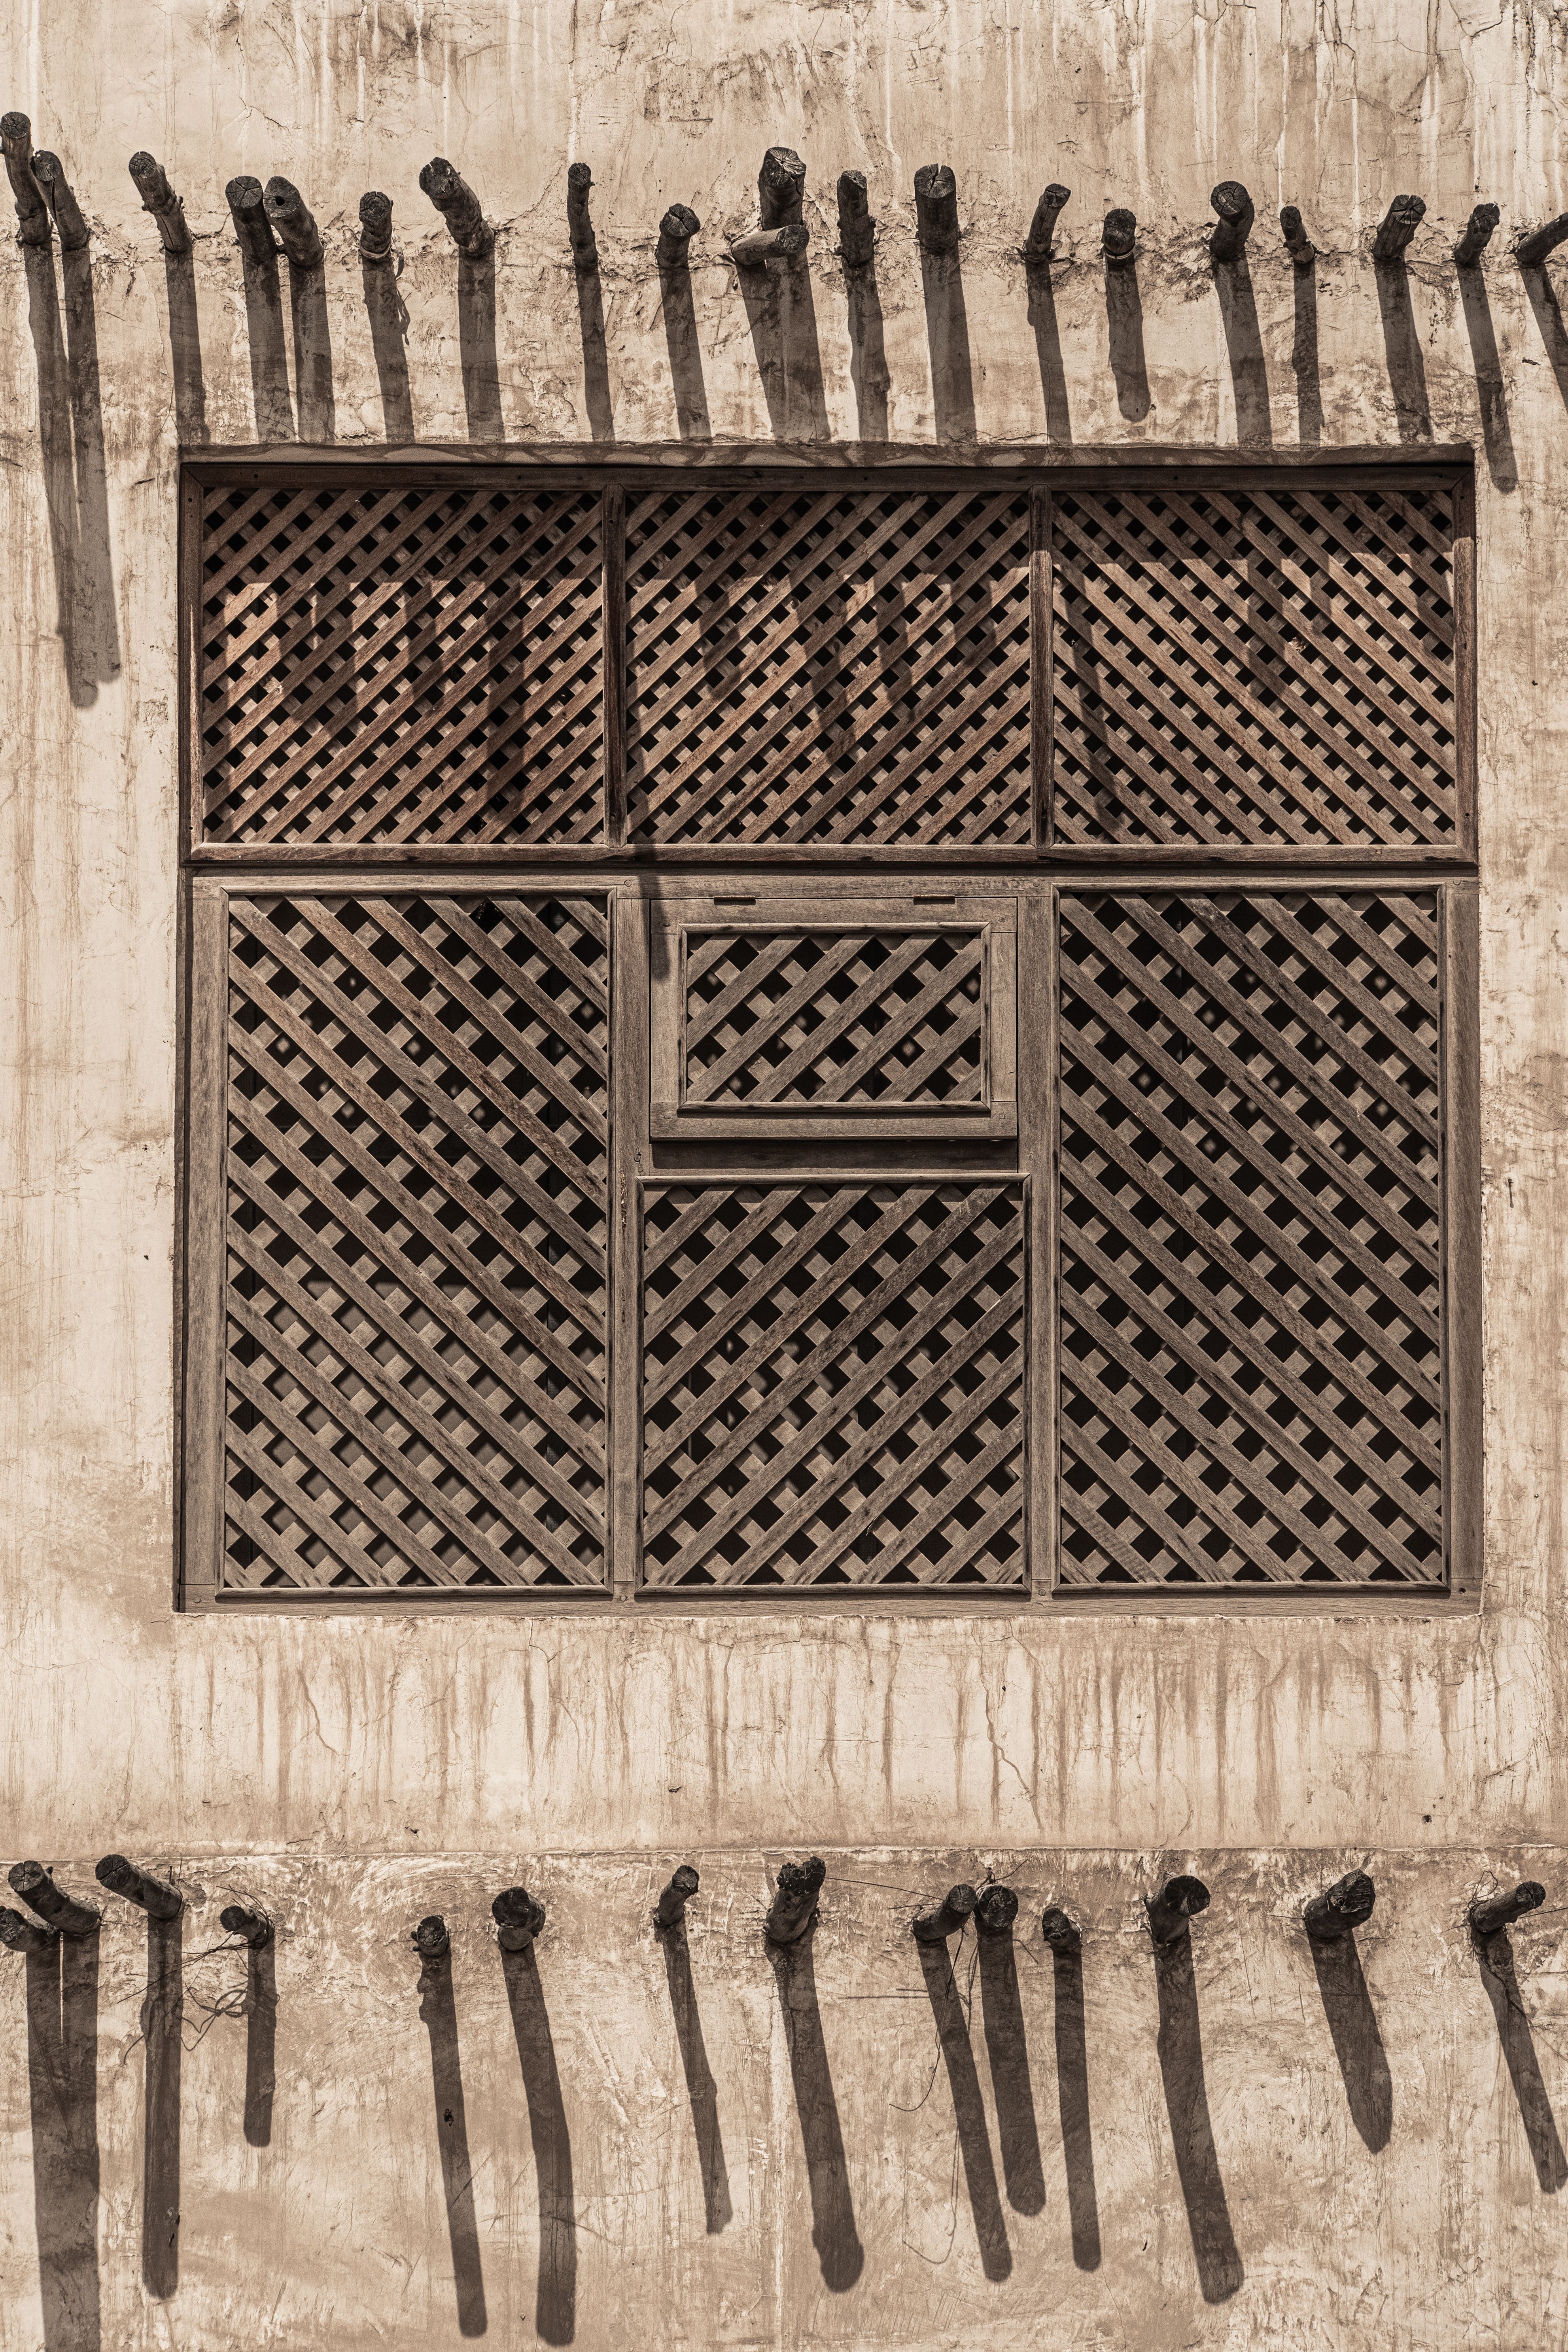 A historic Qatari window covered in wooden lattice, captured during the QATAR-USA 2021 Photography Exchange.